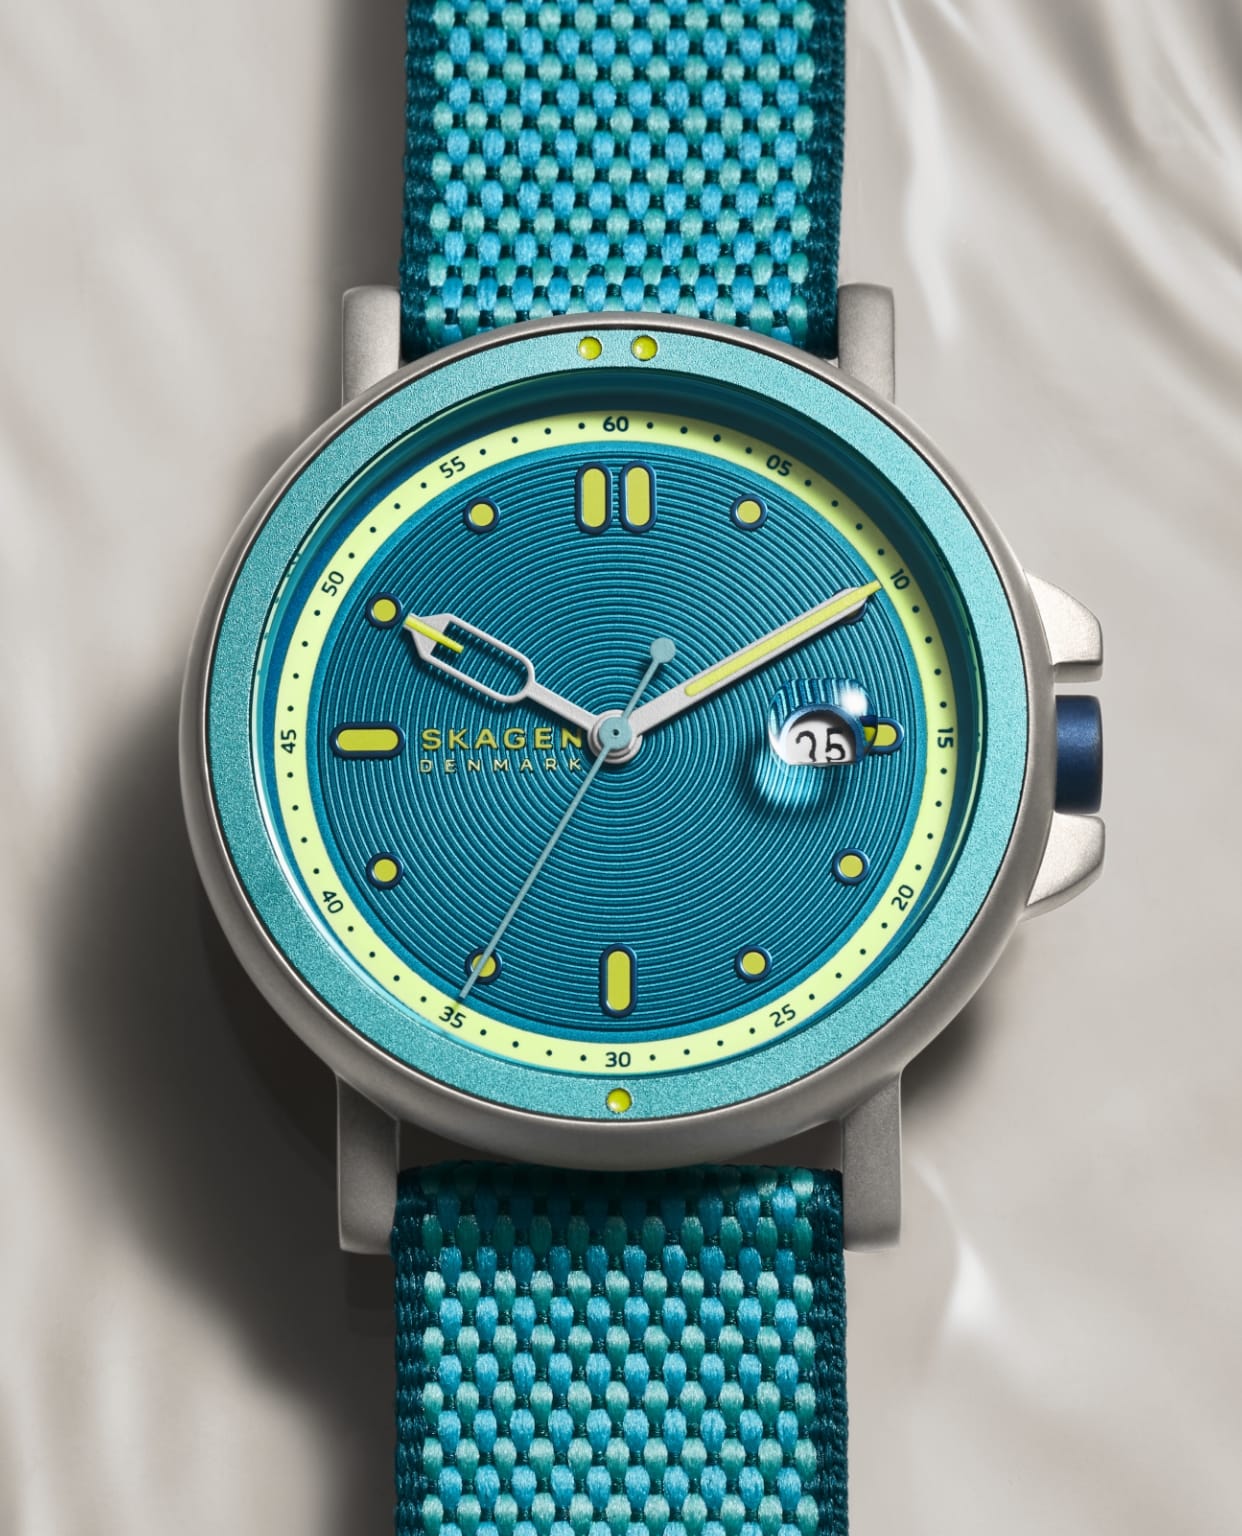 Hero image of the dial on this limited edition Signatur watch